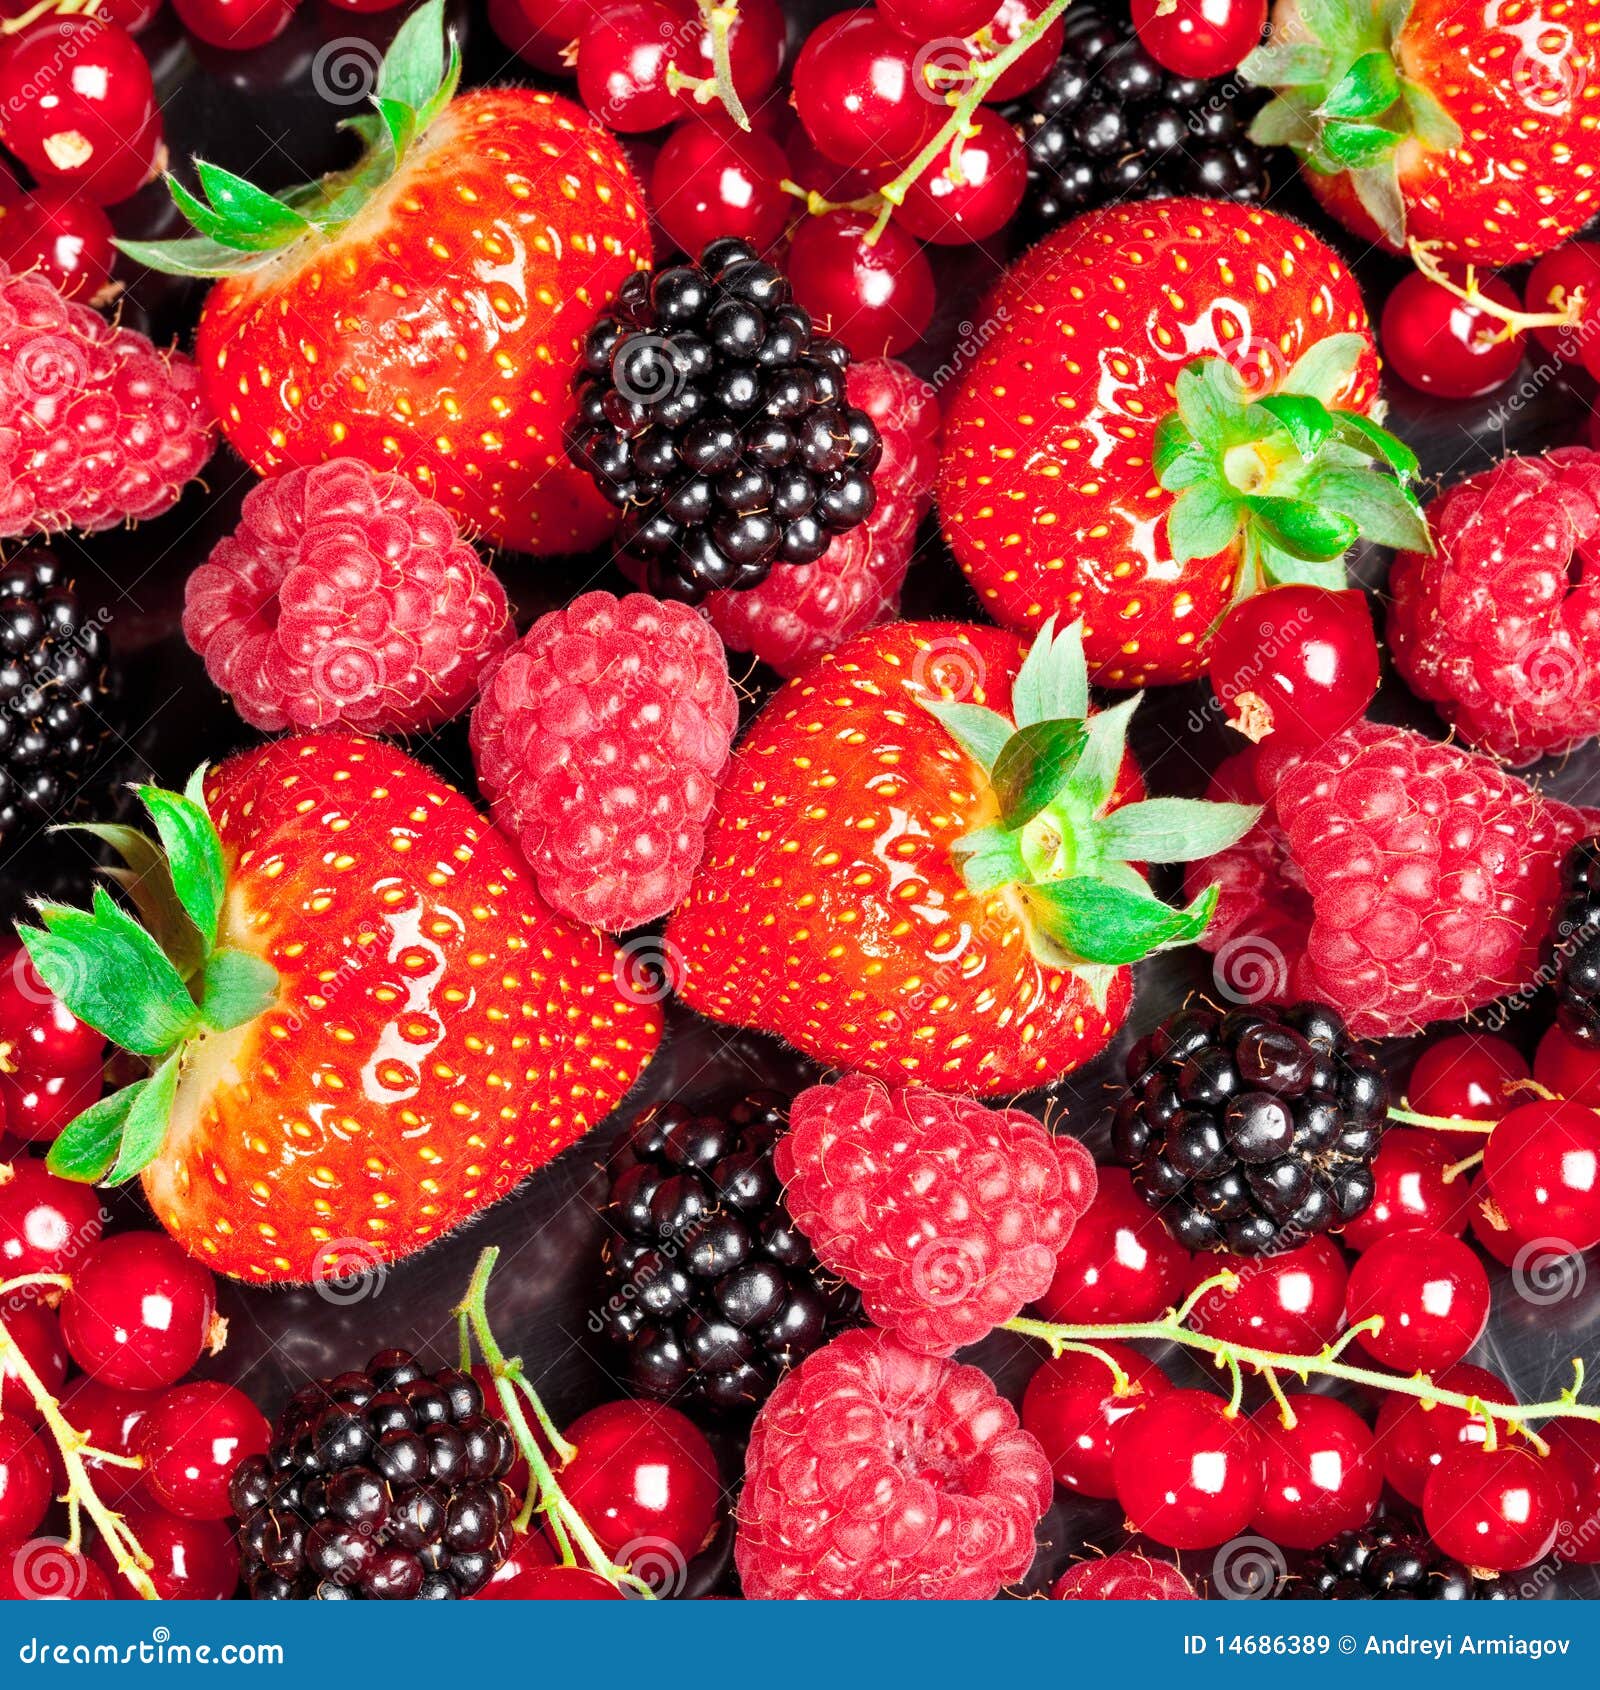 Berrys Royalty Free Stock Images - Image: 14686389